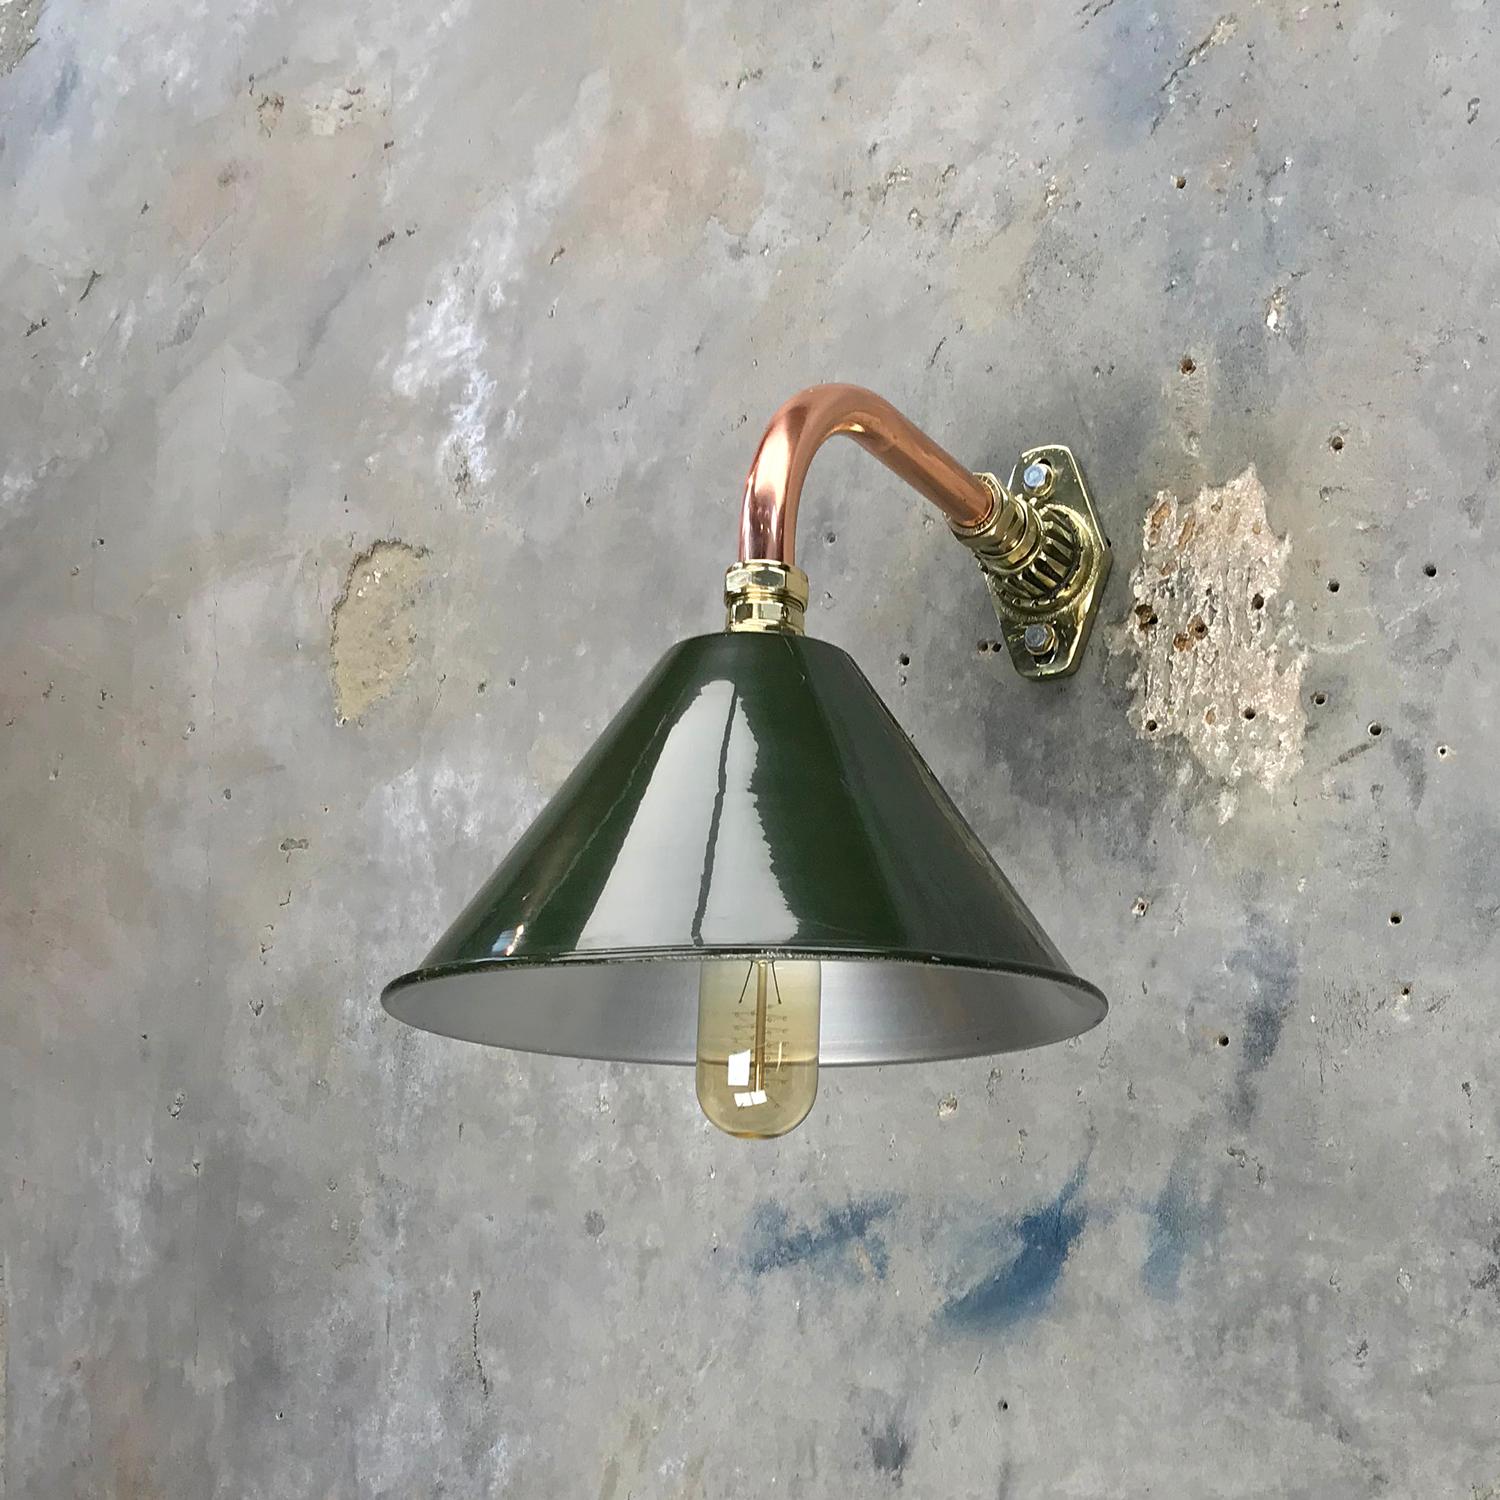 1980s Ex British Army Light Shade / Copper and Brass Cantilever, Original Green For Sale 3